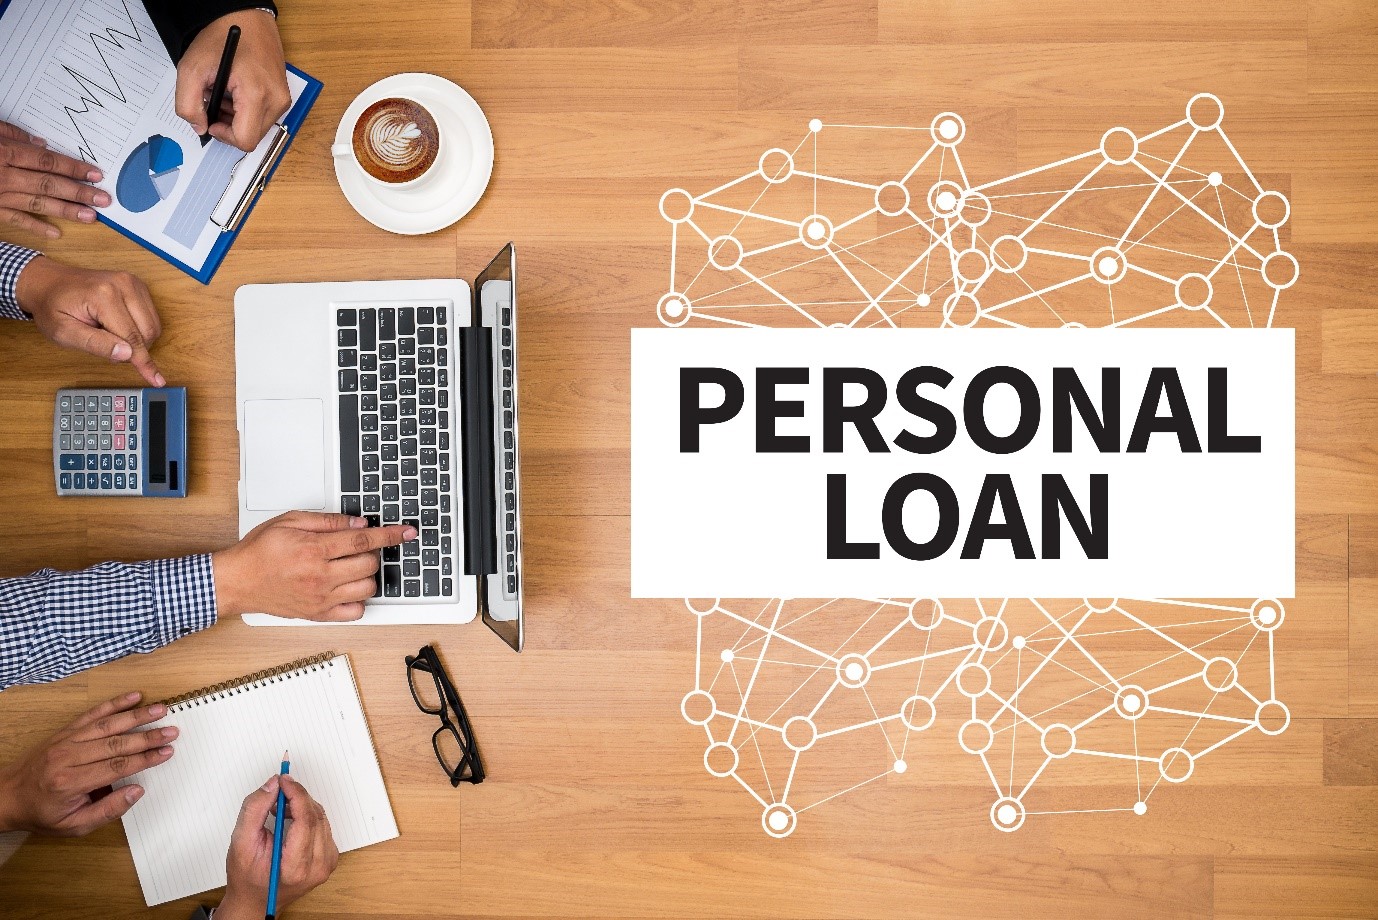 A top-up loan or a concurrent personal loan – which option is best?